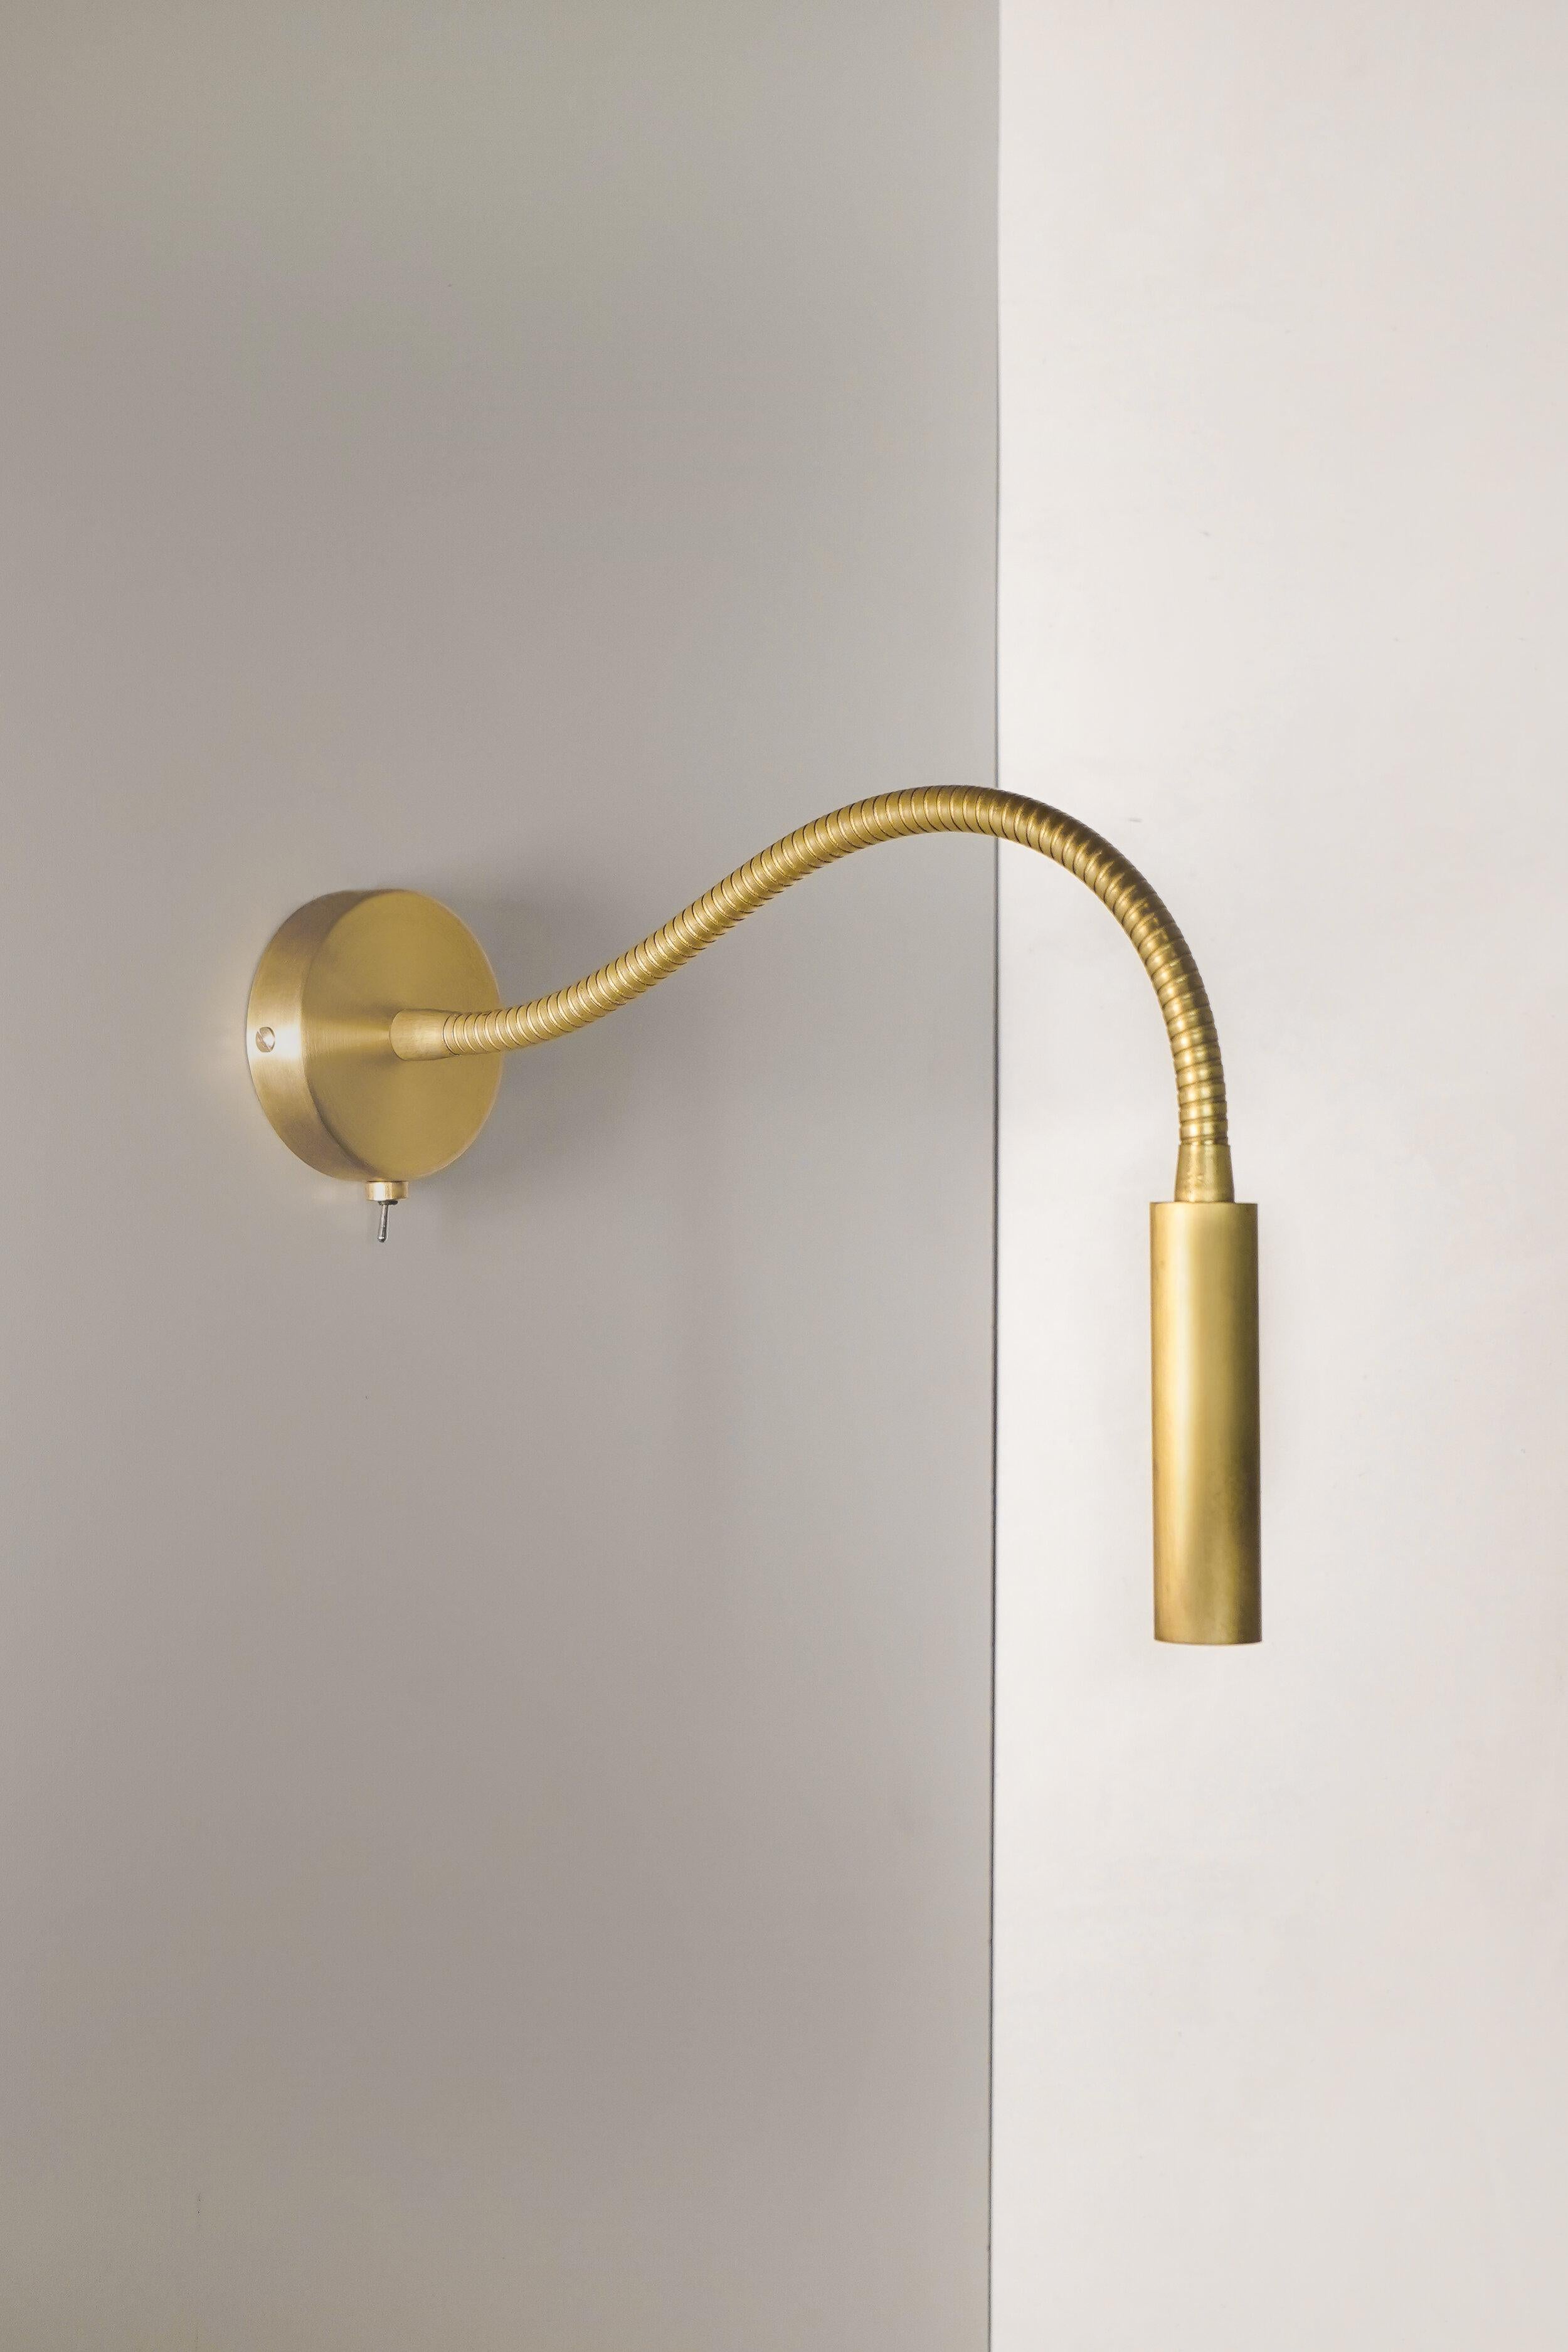 Book Flexo switch wall light by Contain
Dimensions: D 2.5 x W 8 x H 46.5 cm (standard length)
Materials: Brass.
Available in different finishes.

All our lamps can be wired according to each country. If sold to the USA it will be wired for the